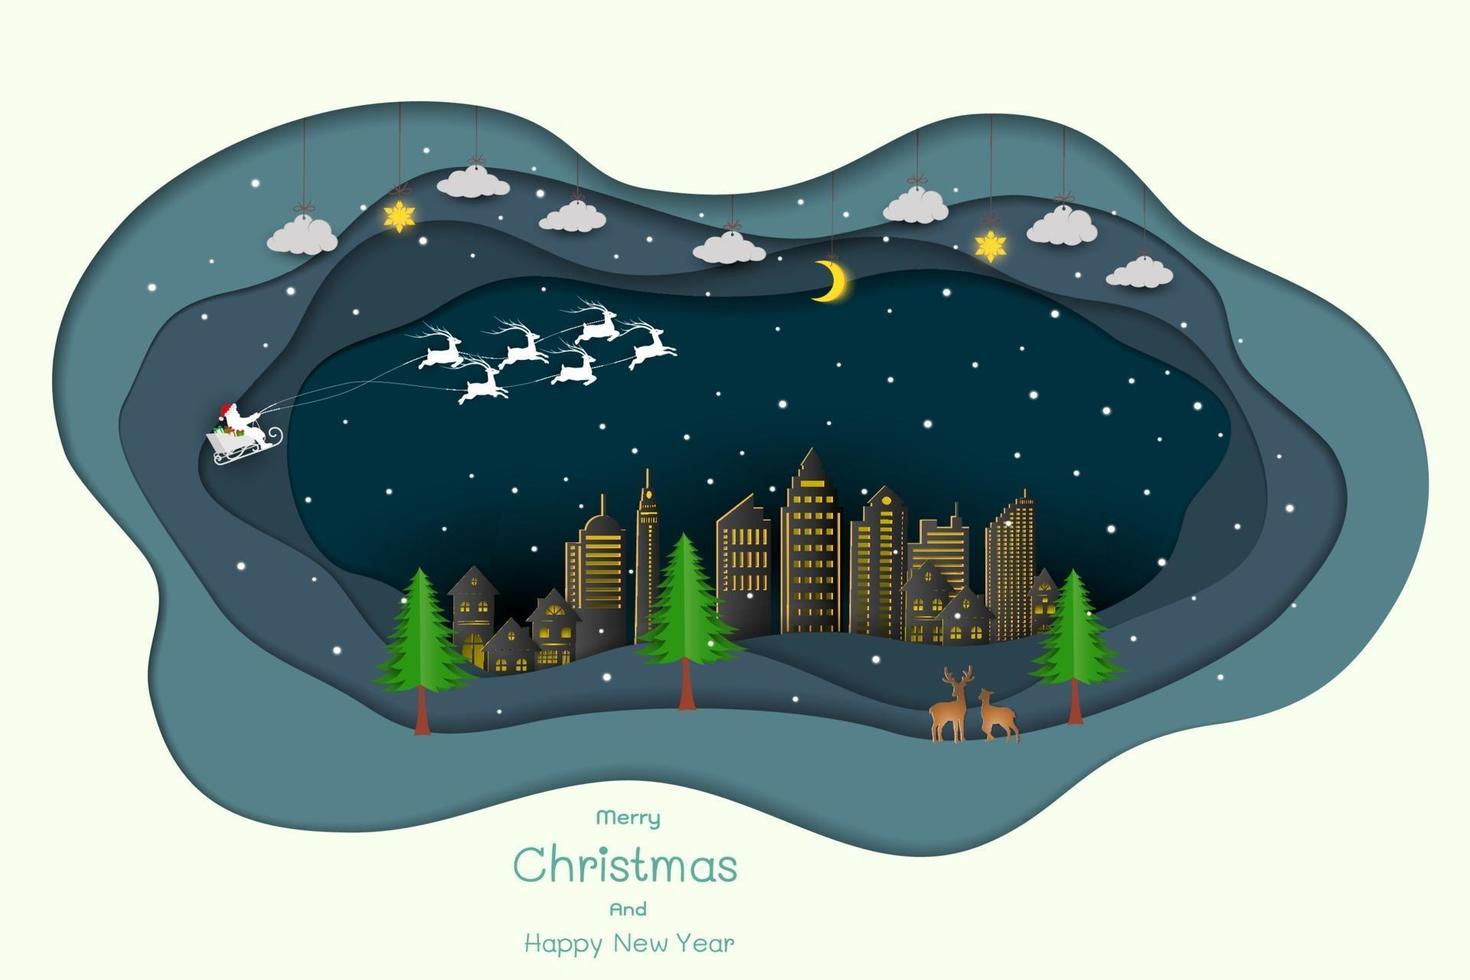 Merry Christmas and Happy new year, paper art style with Santa claus coming to the city on a winter night vector